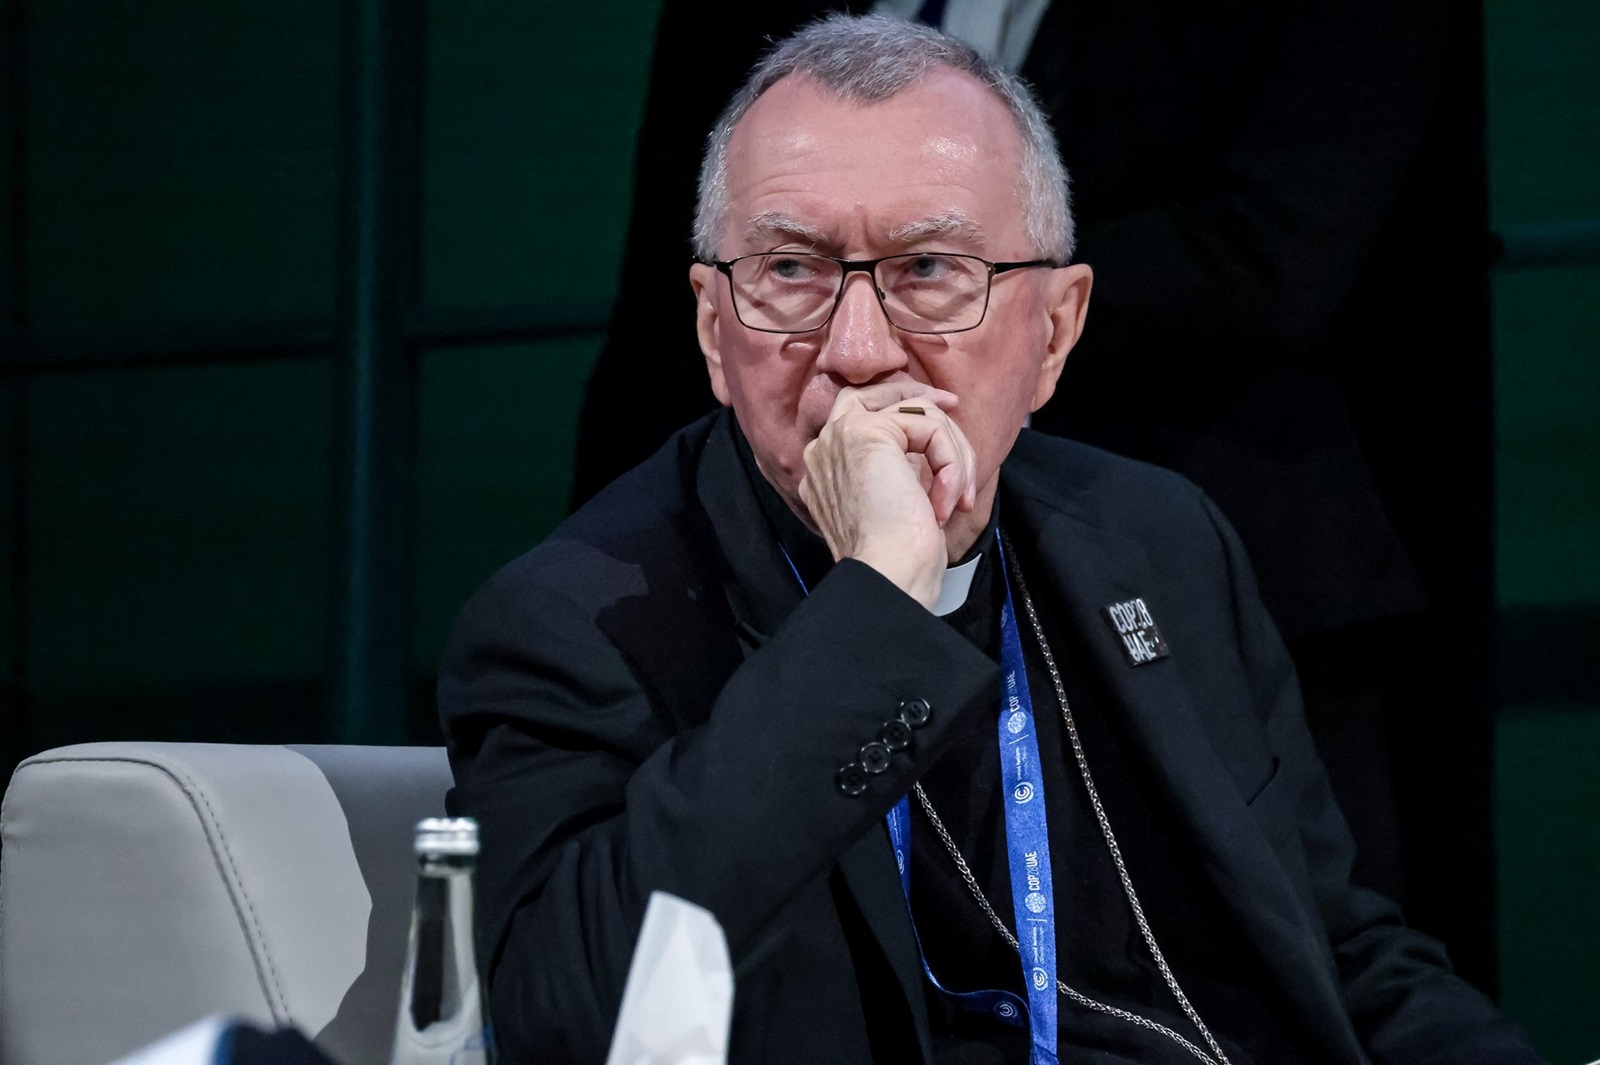 December 2, 2023, Dubai, Dubai, United Arab Emirates: Cardinal Pietro Parolin, Secretary of State of the Holy See, attends the First Part of the High-Level Segment for Heads of States and Governments during the COP28, UN Climate Change Conference, held by UNFCCC in Dubai Exhibition Center, United Arab Emirates on December 2, 2023. COP28, running from November 29 to December 12 focuses on how particular nations managed realization of its climate goals. The Conference in Dubai focuses also on the most vulnerable communities and Loss and Damage Fund.,Image: 826199397, License: Rights-managed, Restrictions: * France Rights OUT *, Model Release: no, Credit line: Dominika Zarzycka / Zuma Press / Profimedia